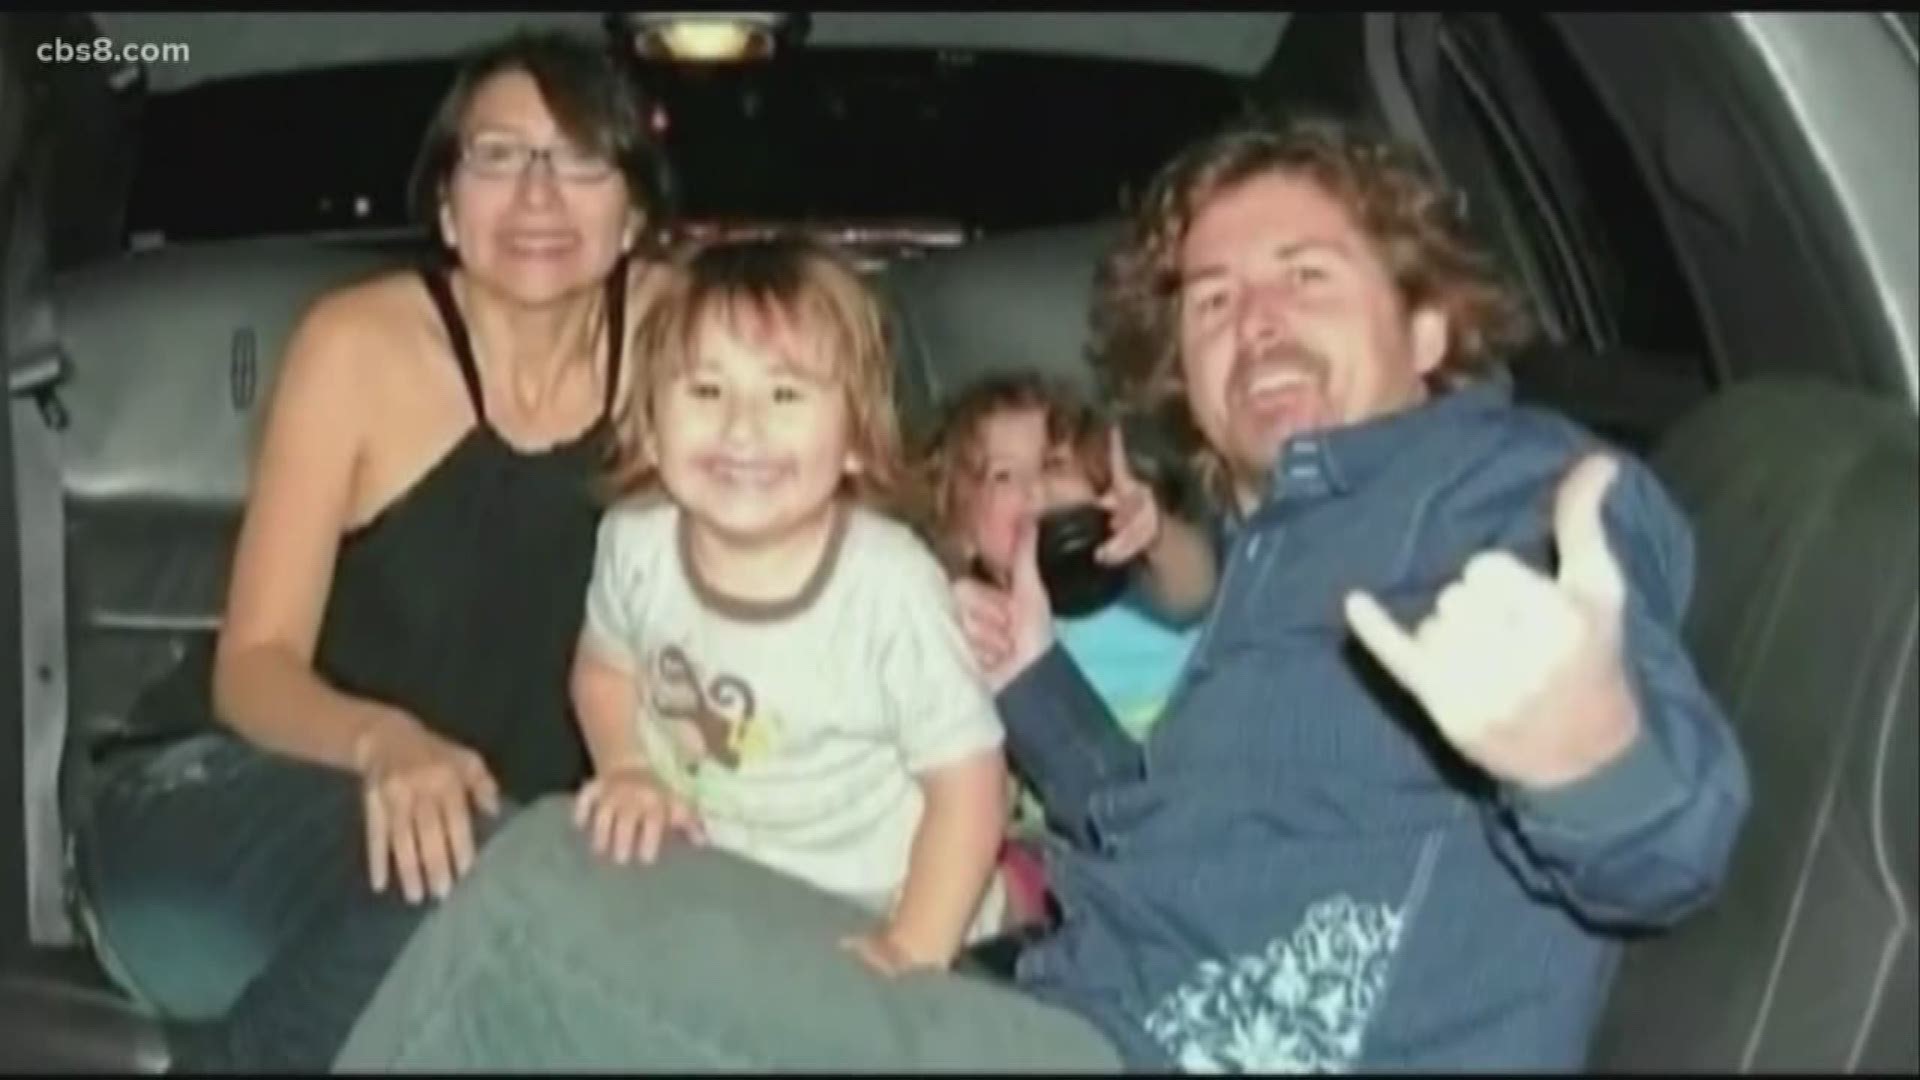 Closing arguments began Tuesday in the McStay family murder trial. Charles Merritt, a former associate of Joseph McStay, has been charged with killing the Fallbrook family.